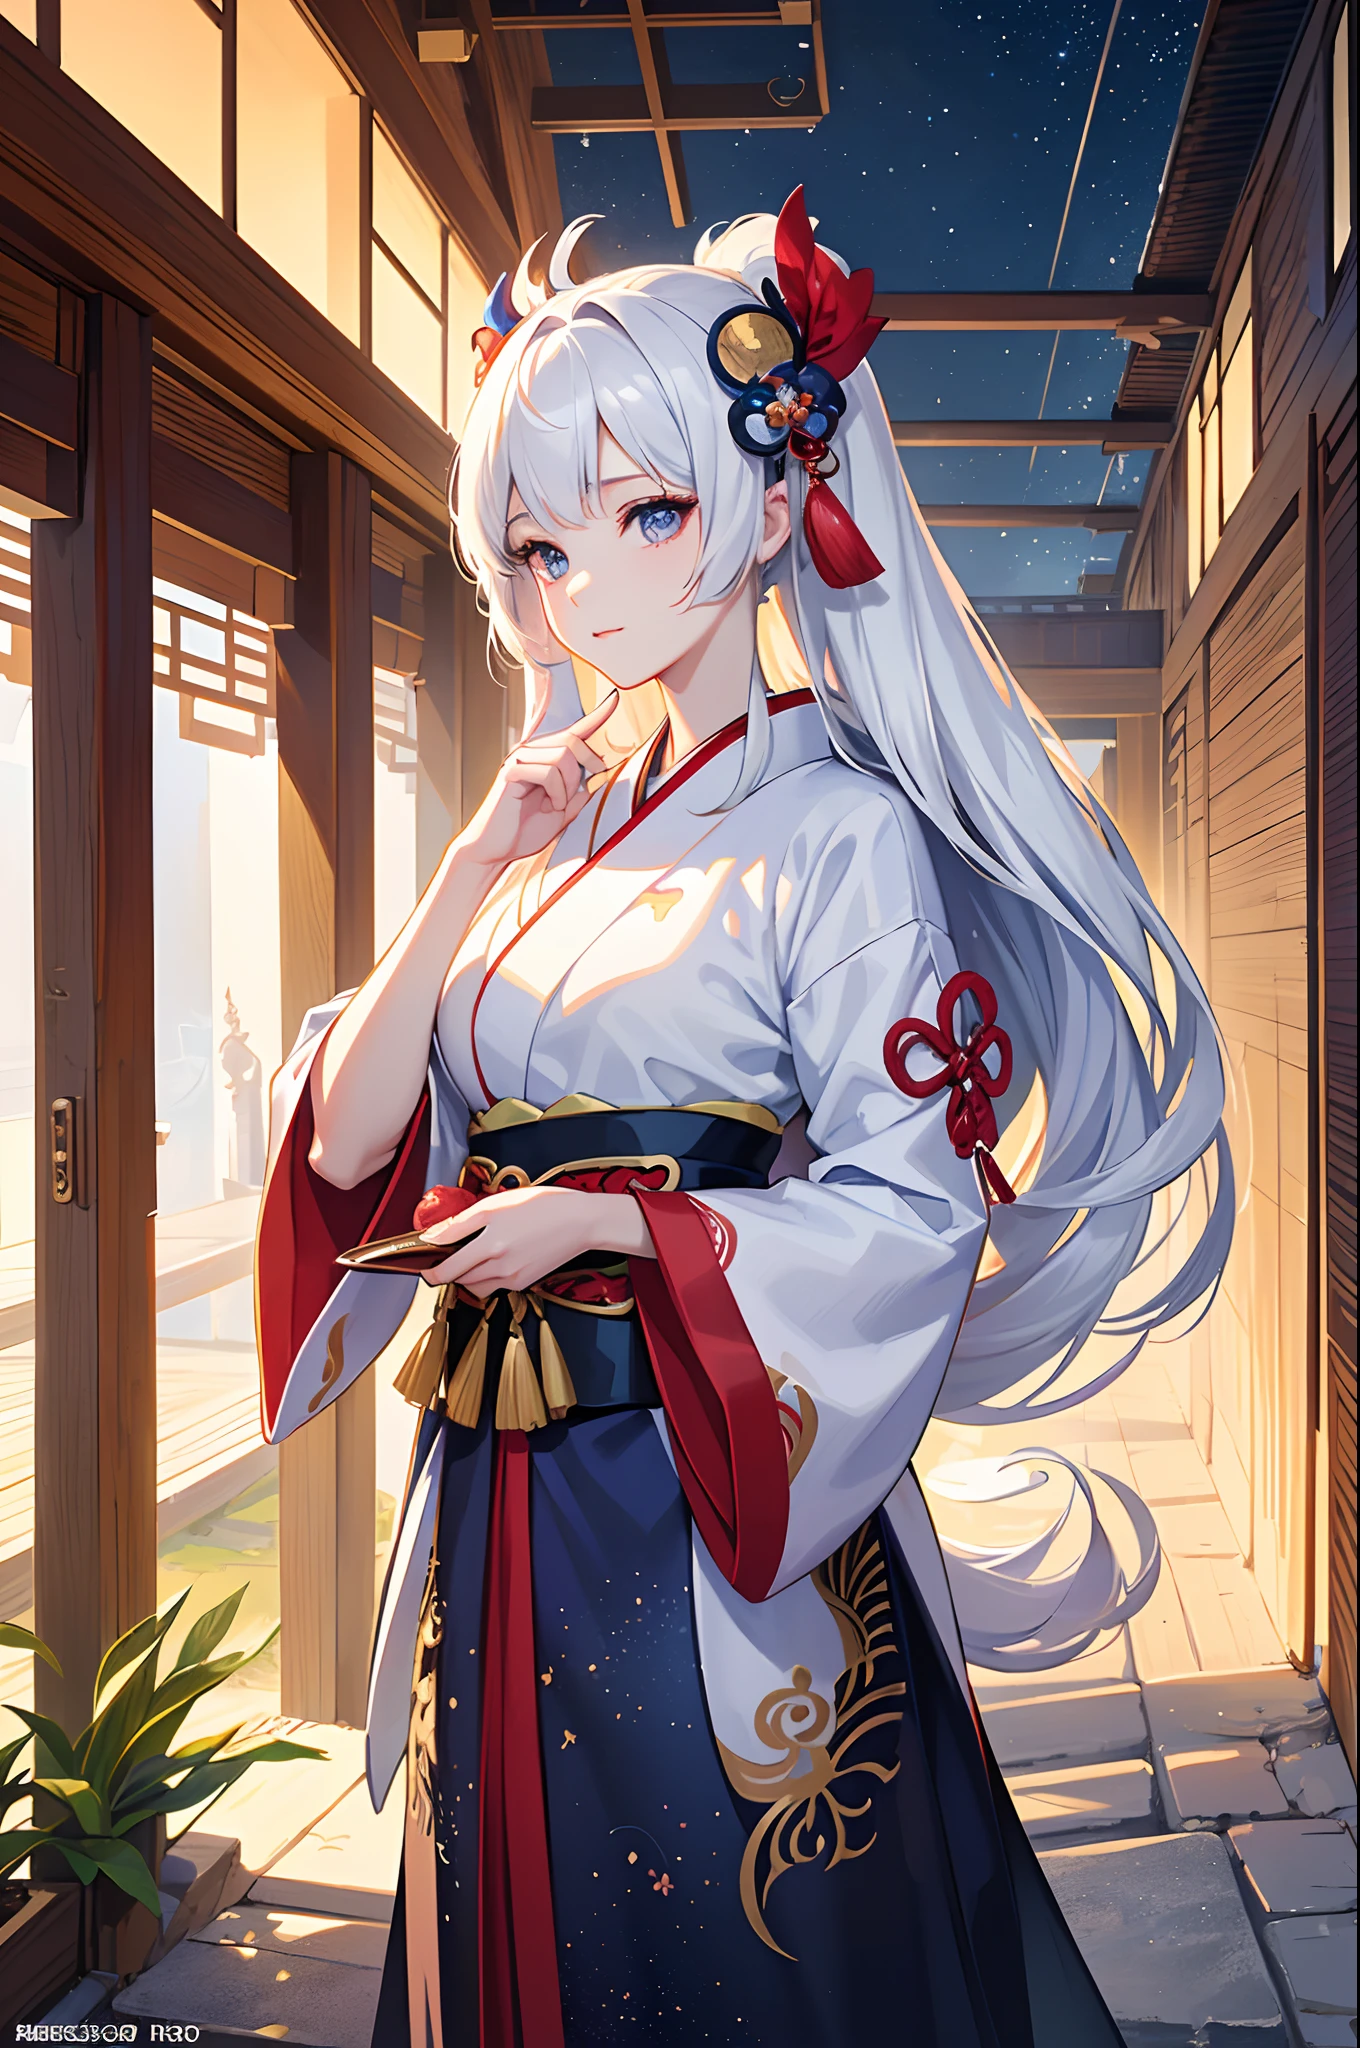 (Kimono girl with a fan, Palace, A girl in Hanfu, Onmyoji detailed works, Soft anime illustration, Popular on ArtStation and Pixiv, onmyoji, Clean and complex anime art, White-haired deity, Digital art on Pixiv, Cute anime fat girl in beautiful clothes, Portrait of Onmyoji, komono)，(Best quality, 4K, 8K, A high resolution, Masterpiece:1.2), Ultra-detailed, (Realistic, Photorealistic, photo-realistic:1.37), hdr, hyper HD, Studio lighting, Ultra-fine painting, Sharp focus, Physically-based rendering, Extreme detail description, professional, Vivid colors, Bokeh, sportrait, anime big breast, Vibrant colors, Soft lighting(Best quality,4K,8K,A high resolution,Masterpiece:1.2),Ultra-detailed,(Realistic,Photorealistic,photo-realistic:1.37),Anime girl standing in bamboo forest in white dress, Pifi Race Champion, Starlight Fairy, aquatic creature, lunar goddess, From Arknights, ethereal anime, Digital art on Piffey, Created by Yuumei, astral ethereal, Beautiful Sky Witch, Pifi, nightcore, Fantasy anime illustration, lunar goddess, [[fantasy]], Piffey style